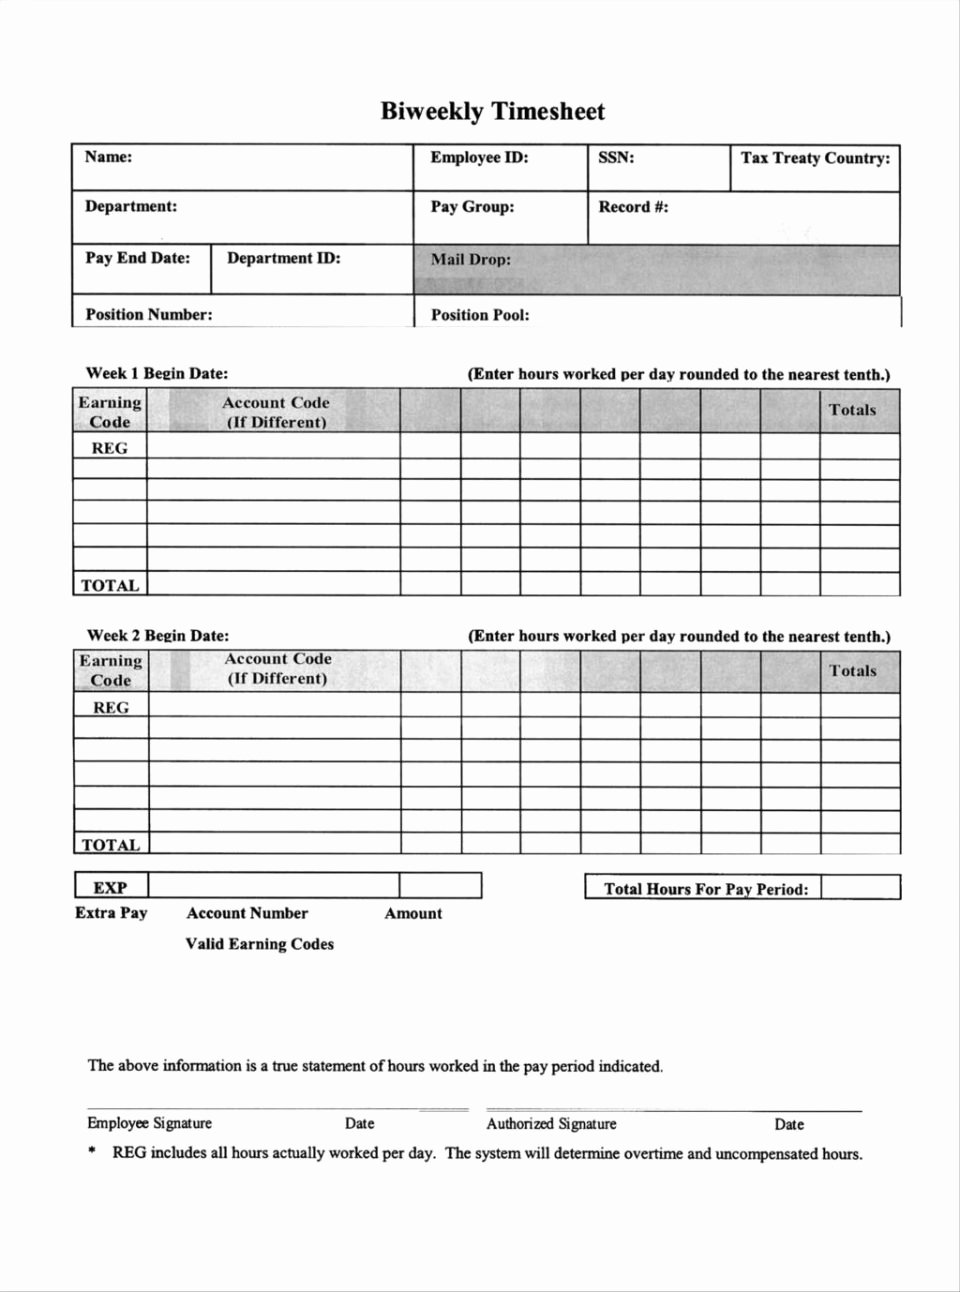 Attorney Billable Hours Template Unique Free Billable Hours Invoice Template Tracking Timesheet